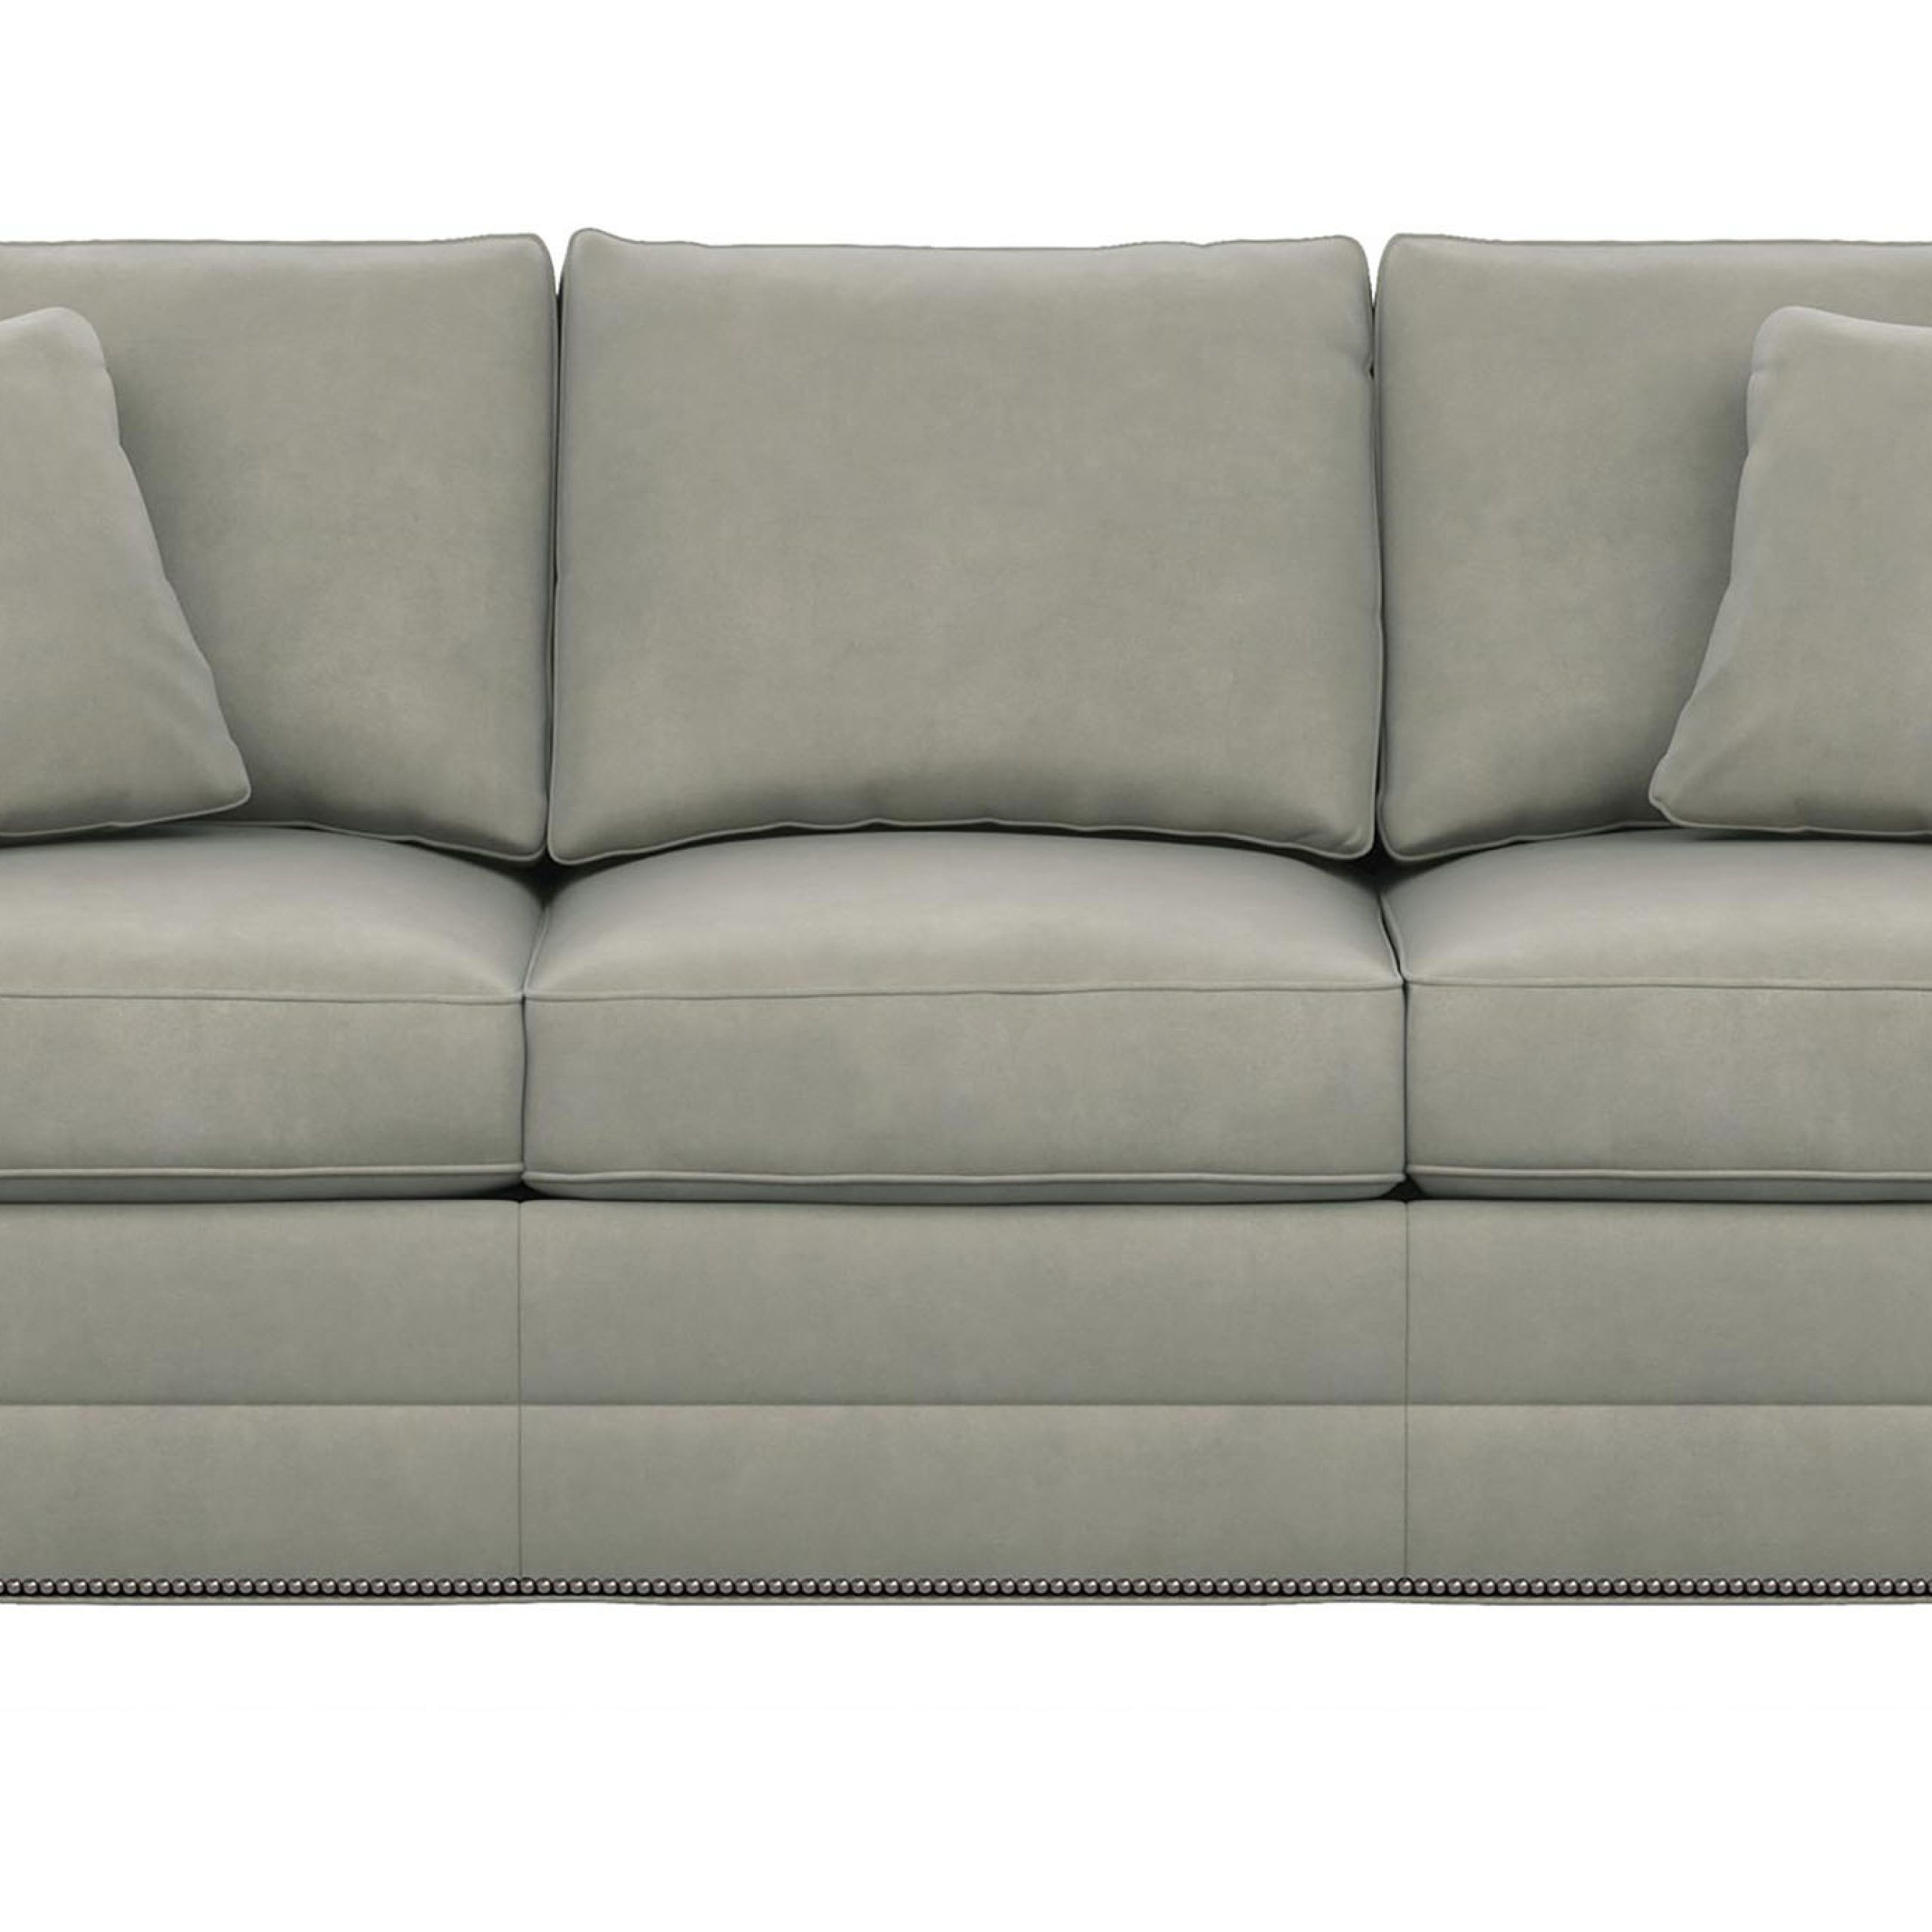 Bennett Roll Arm Three Seat Sofa | Living Room Sofa | Ethan Allen Intended For Traditional 3 Seater Sofas (Gallery 16 of 20)